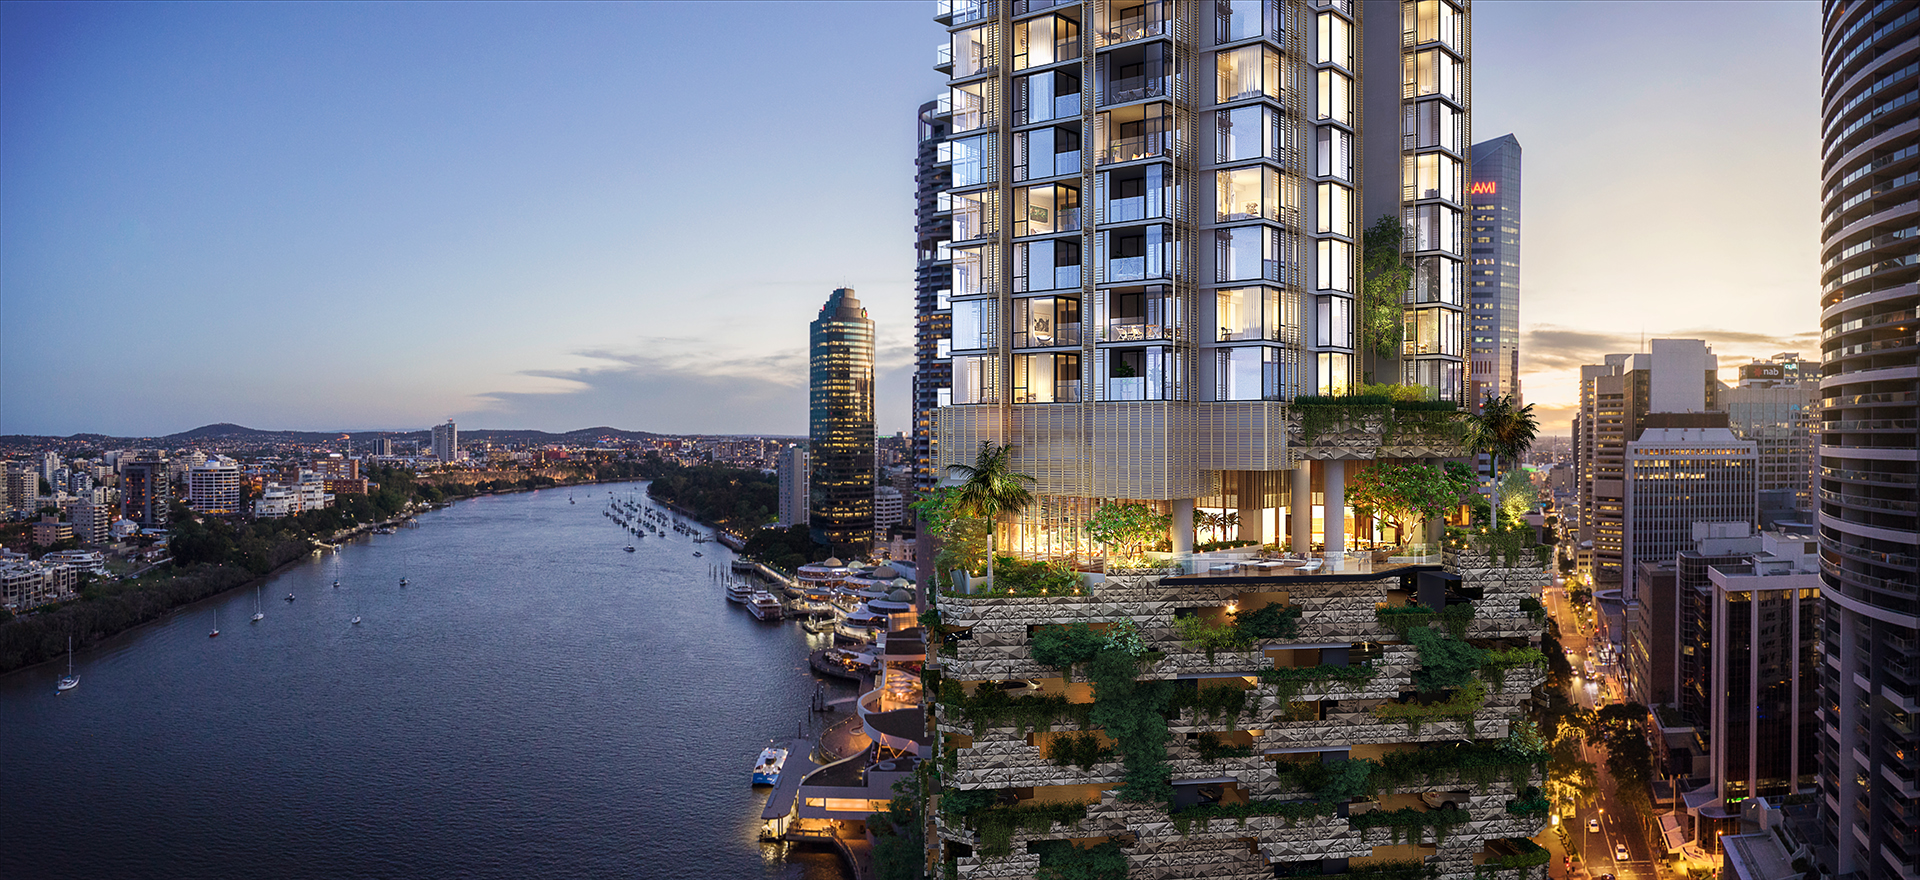 A render image of 443 Queen St from the Brisbane river.